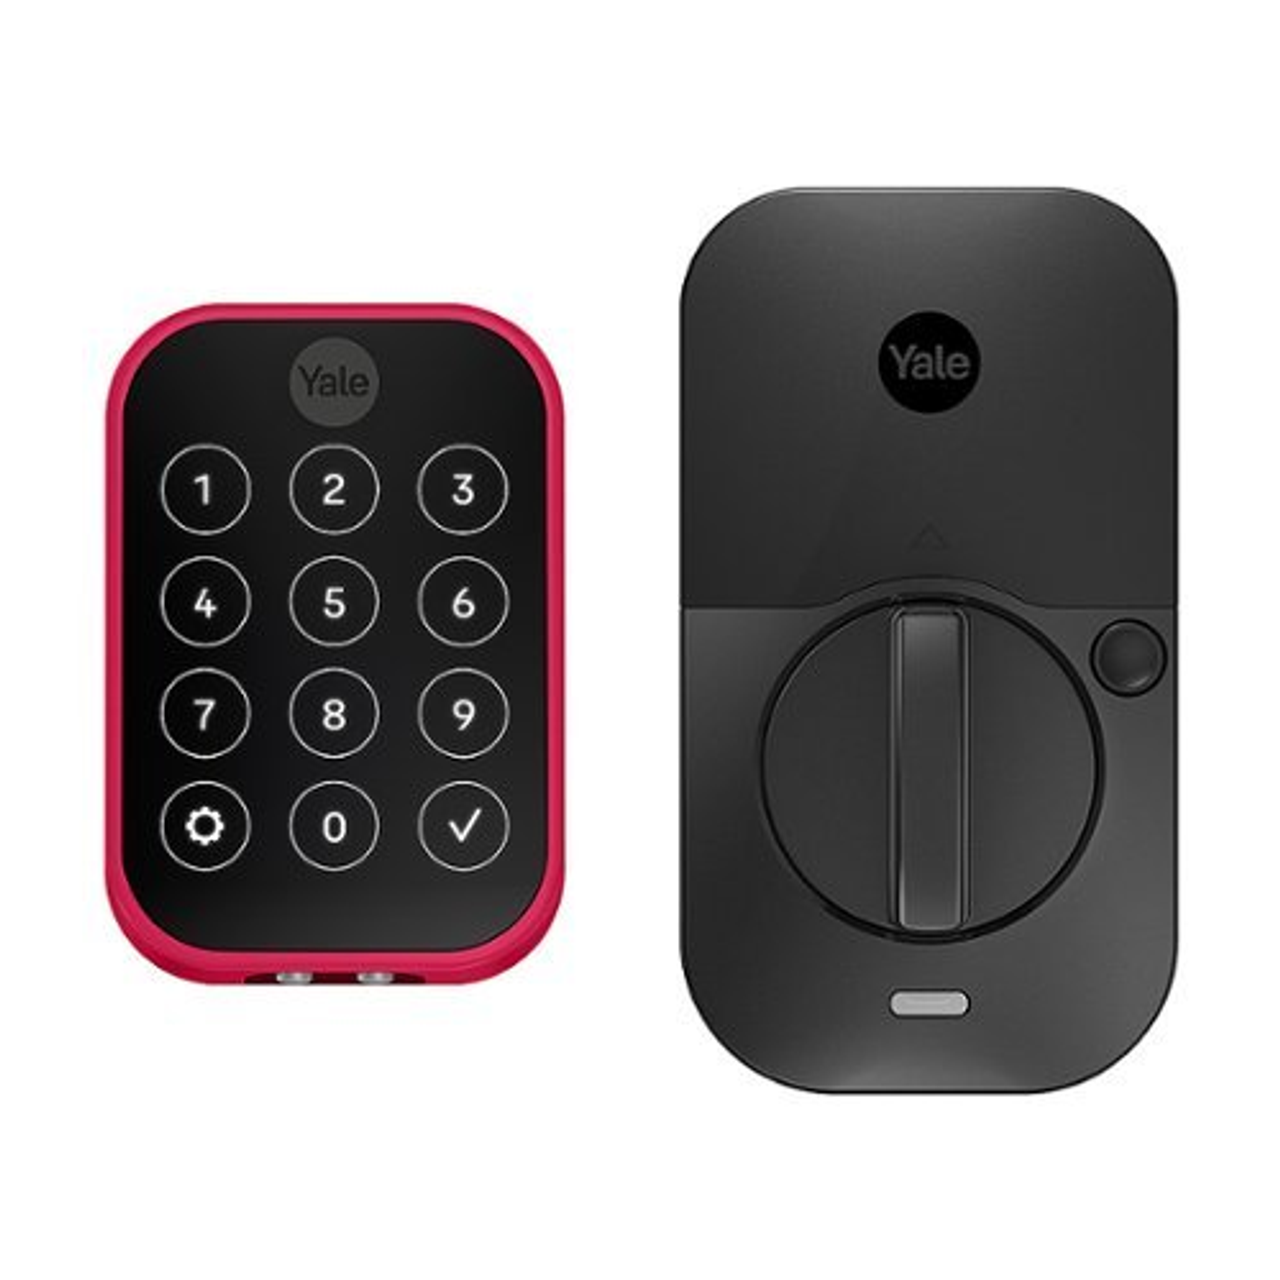 Yale - Pantone Assure Lock 2 Smart Lock Wi-Fi Replacement Deadbolt with Touchscreen, App, and Electronic Guest Keys Access - Pantone Viva Magenta